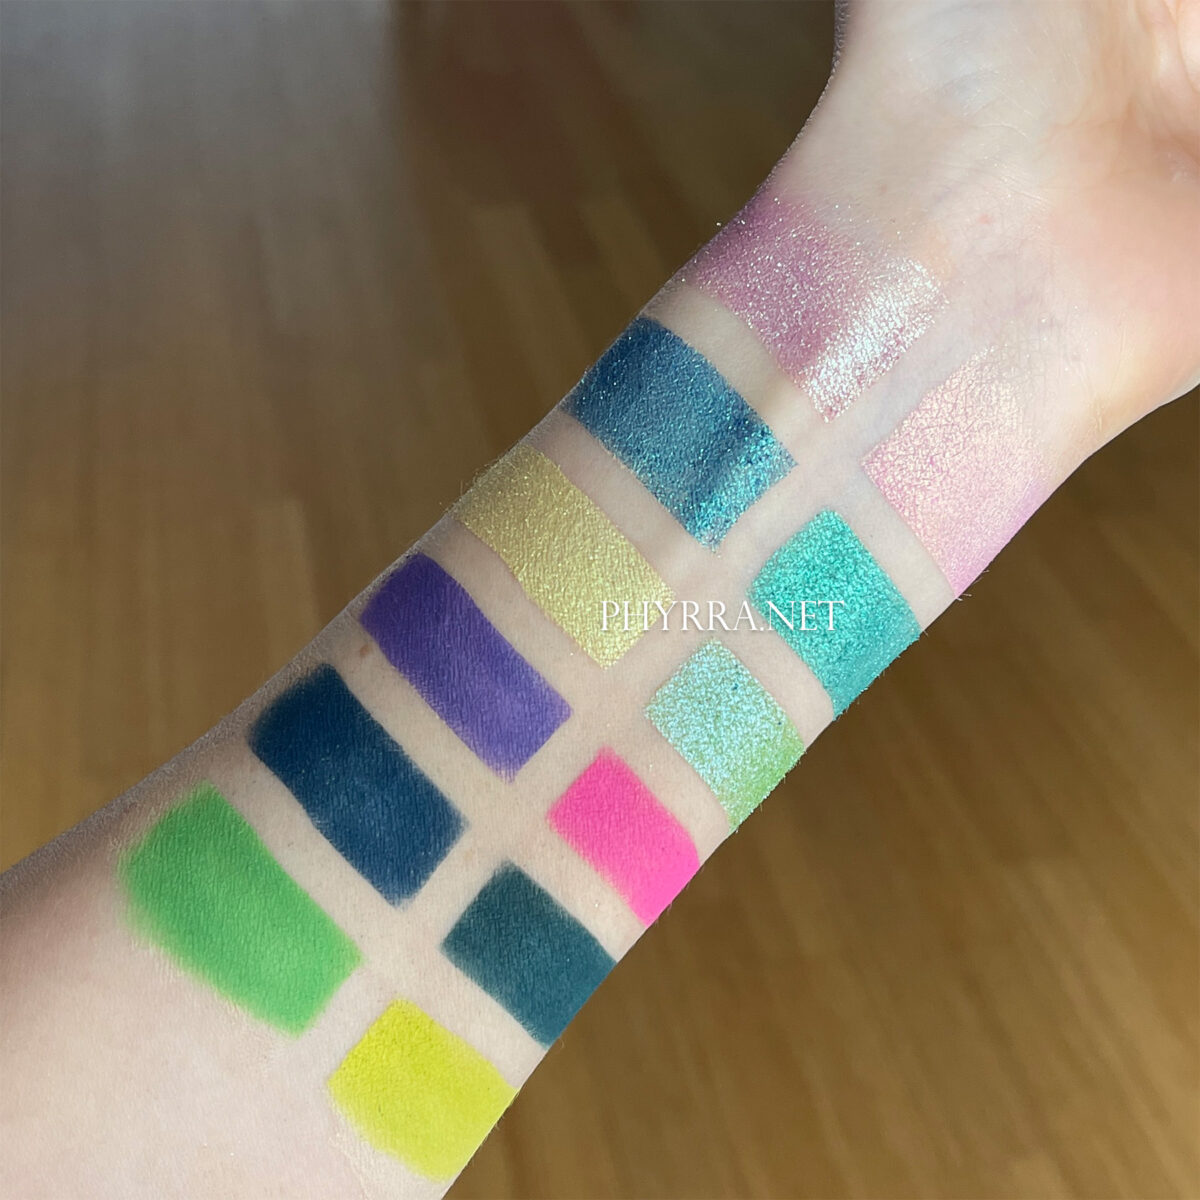 Lethal Cosmetics 1Up Palette Swatches on very fair neutral skin